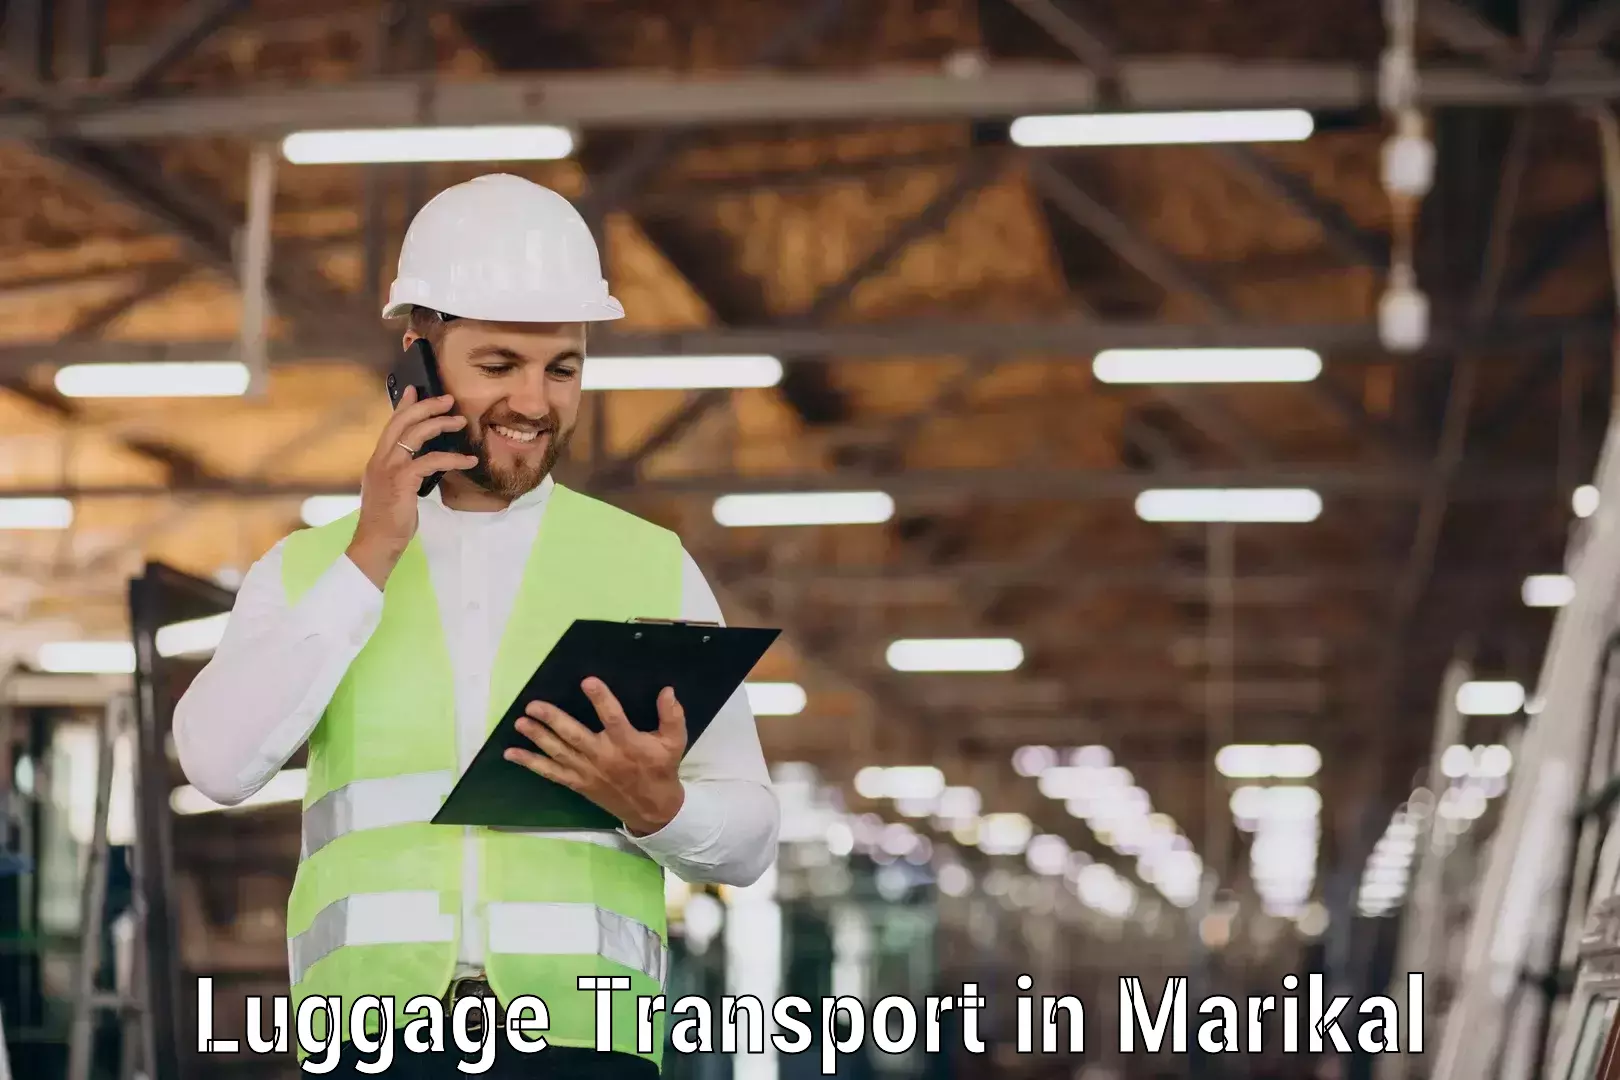 Luggage transport solutions in Marikal